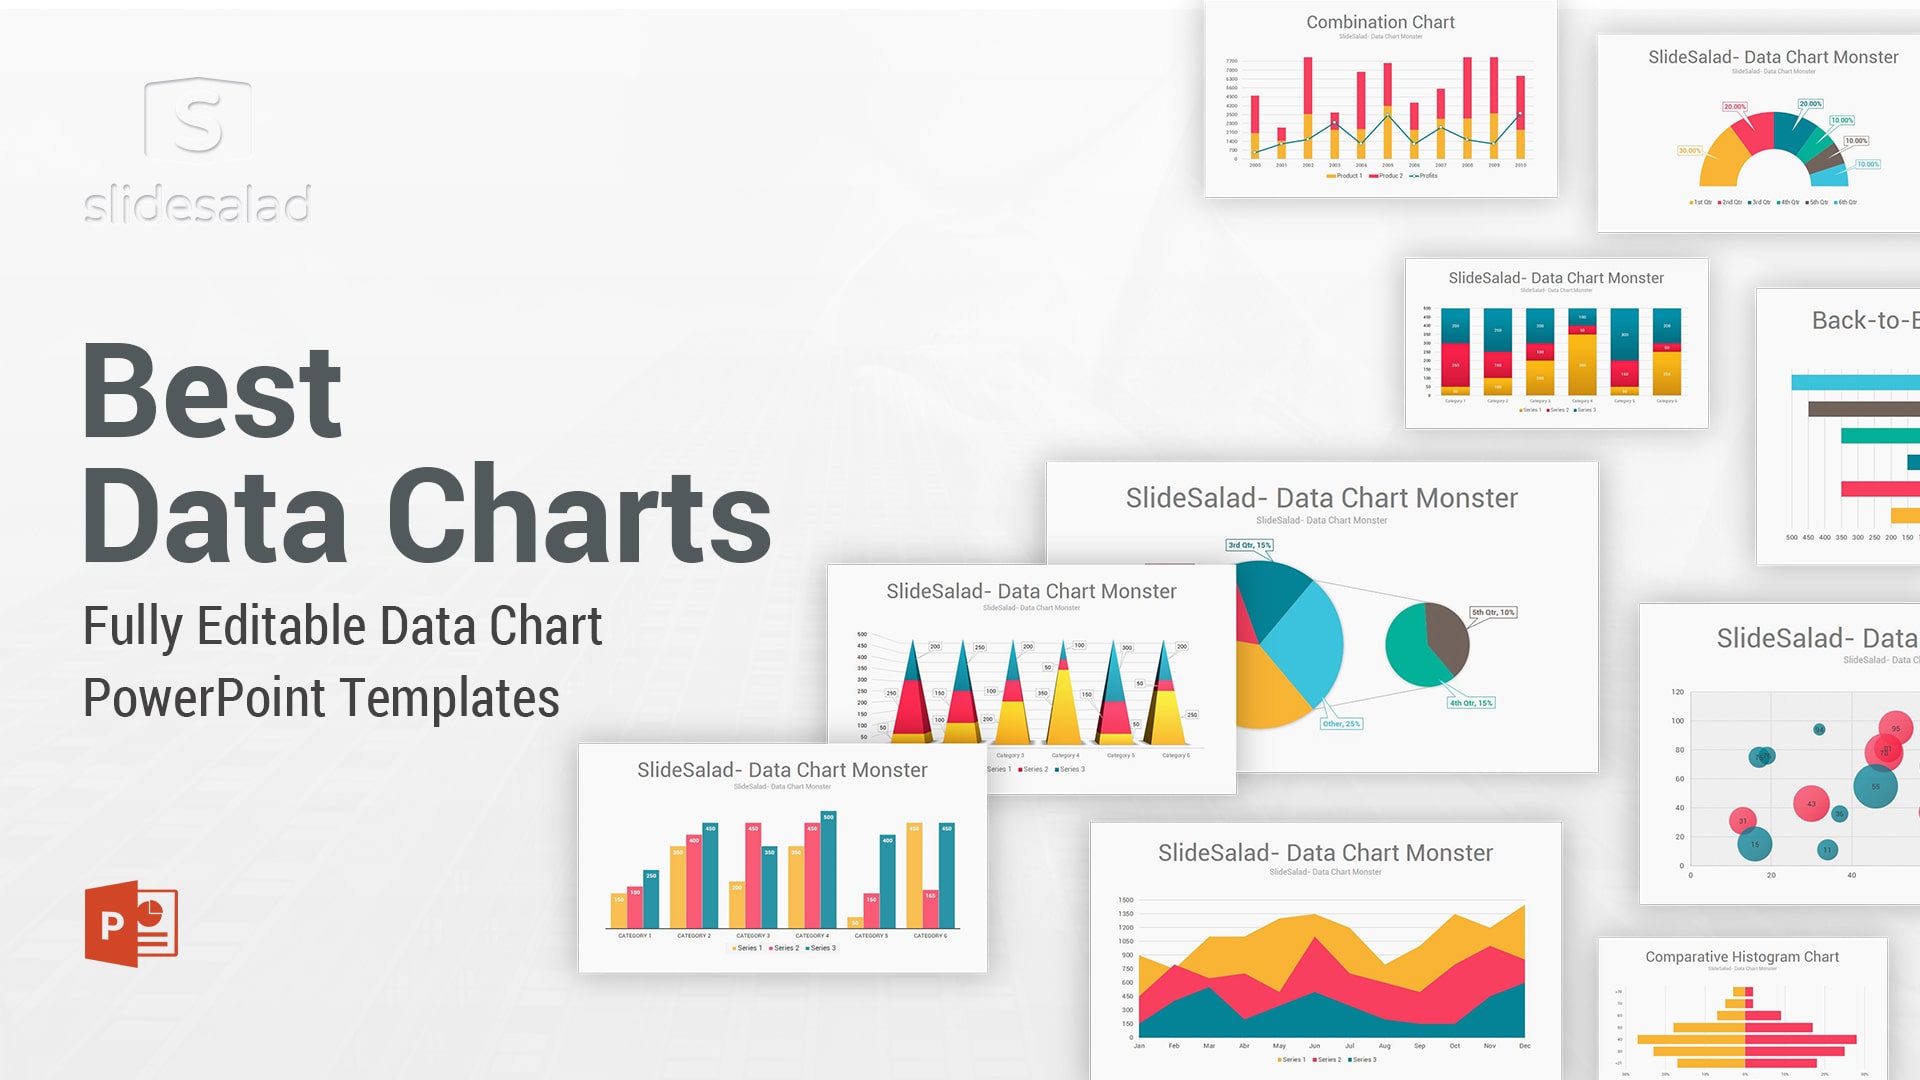 Data Chart Monster PowerPoint Presentation Template - Amazing PowerPoint Templates With Modern Design